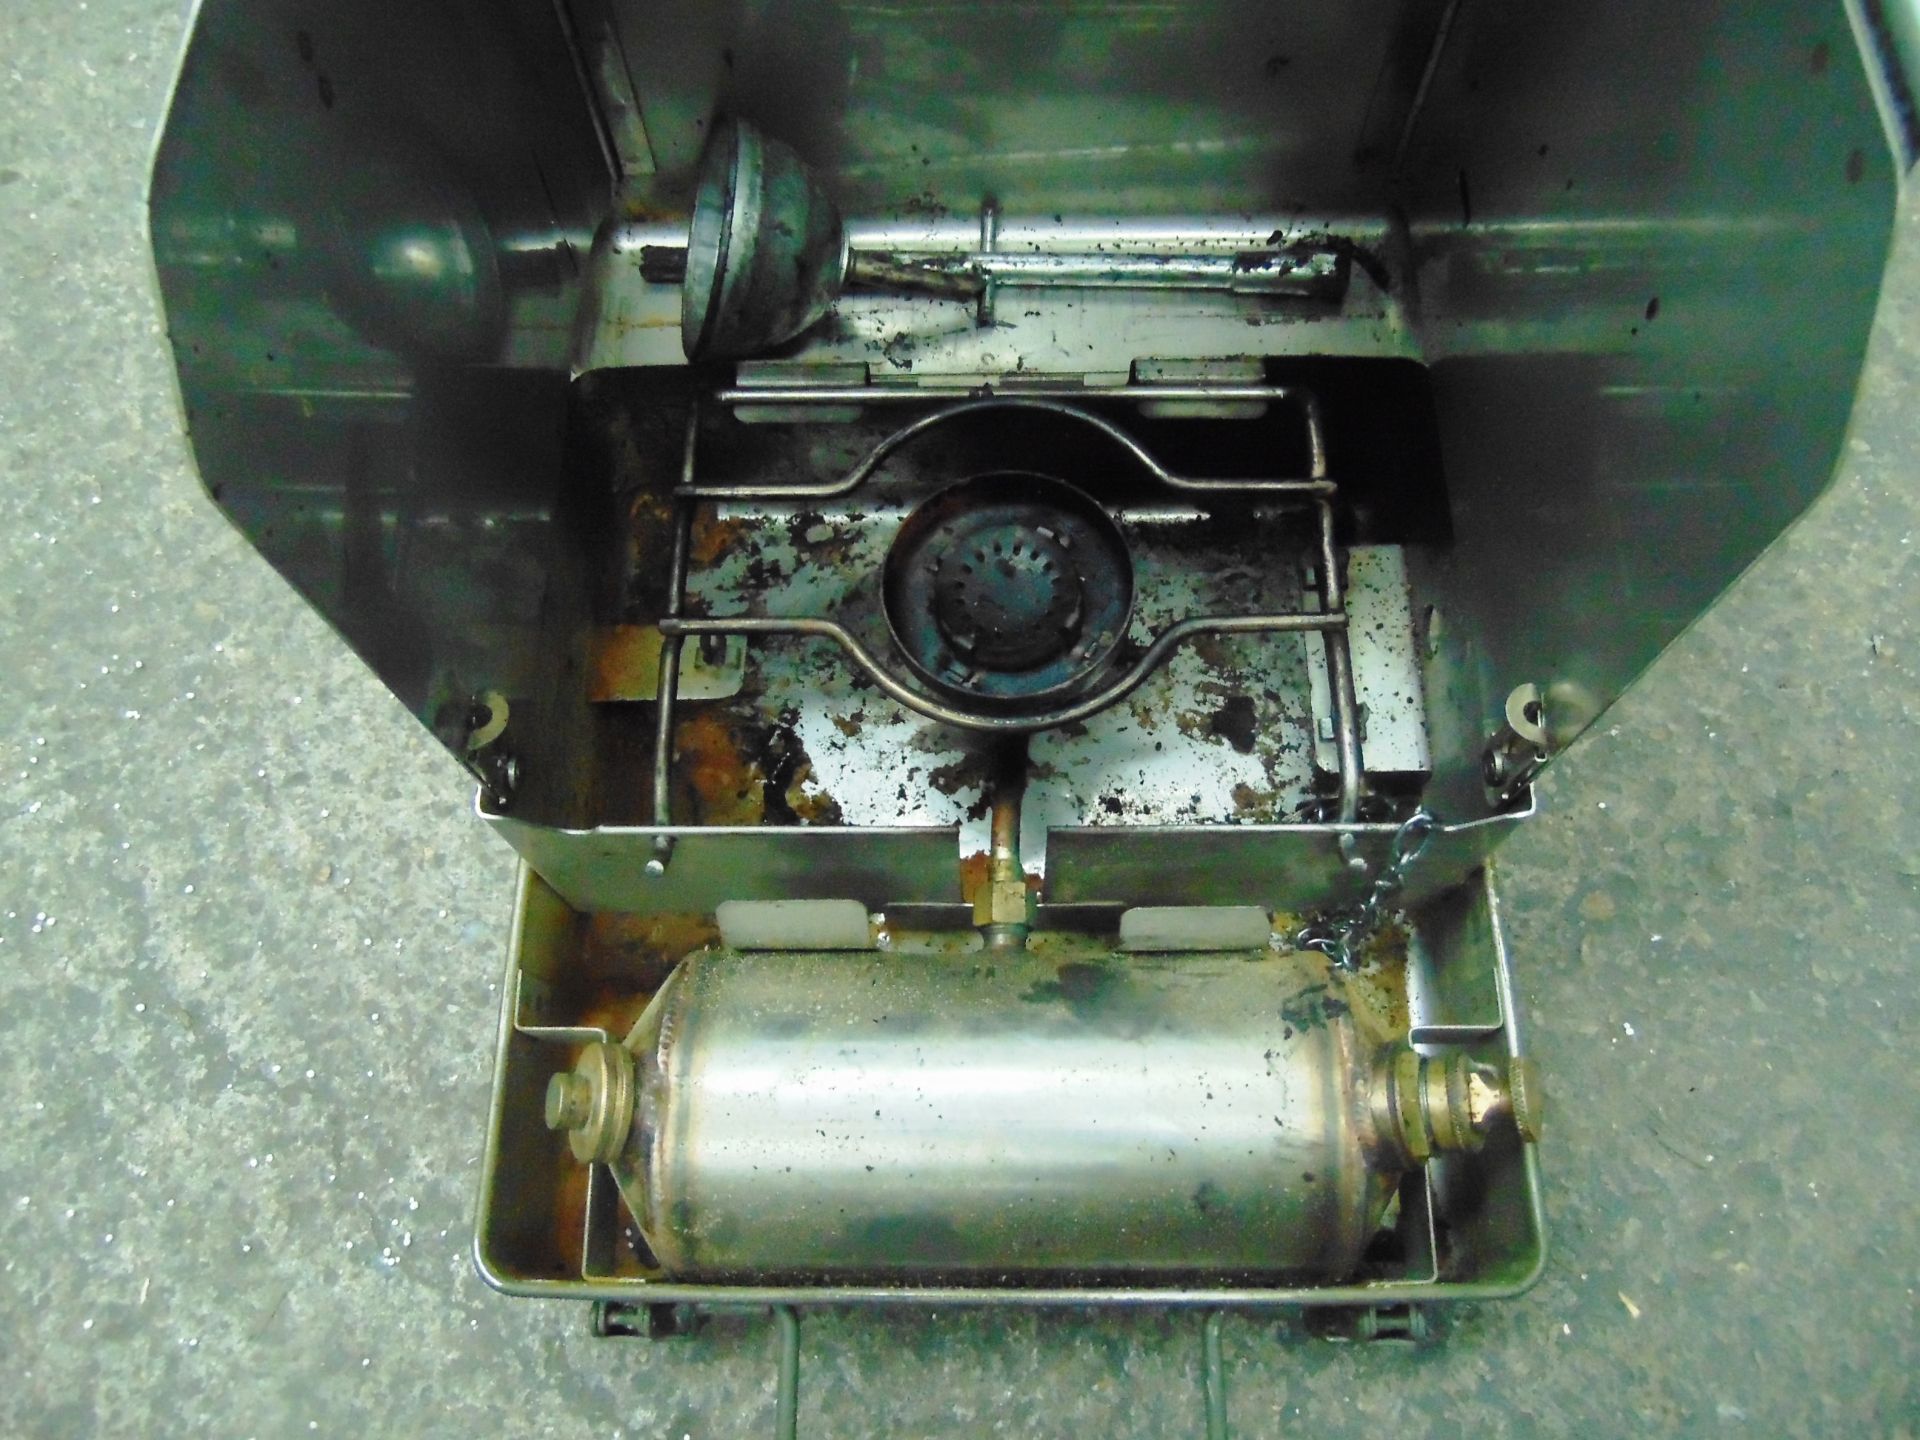 No. 12 Diesel Cooker/Camping Stove - Image 3 of 5